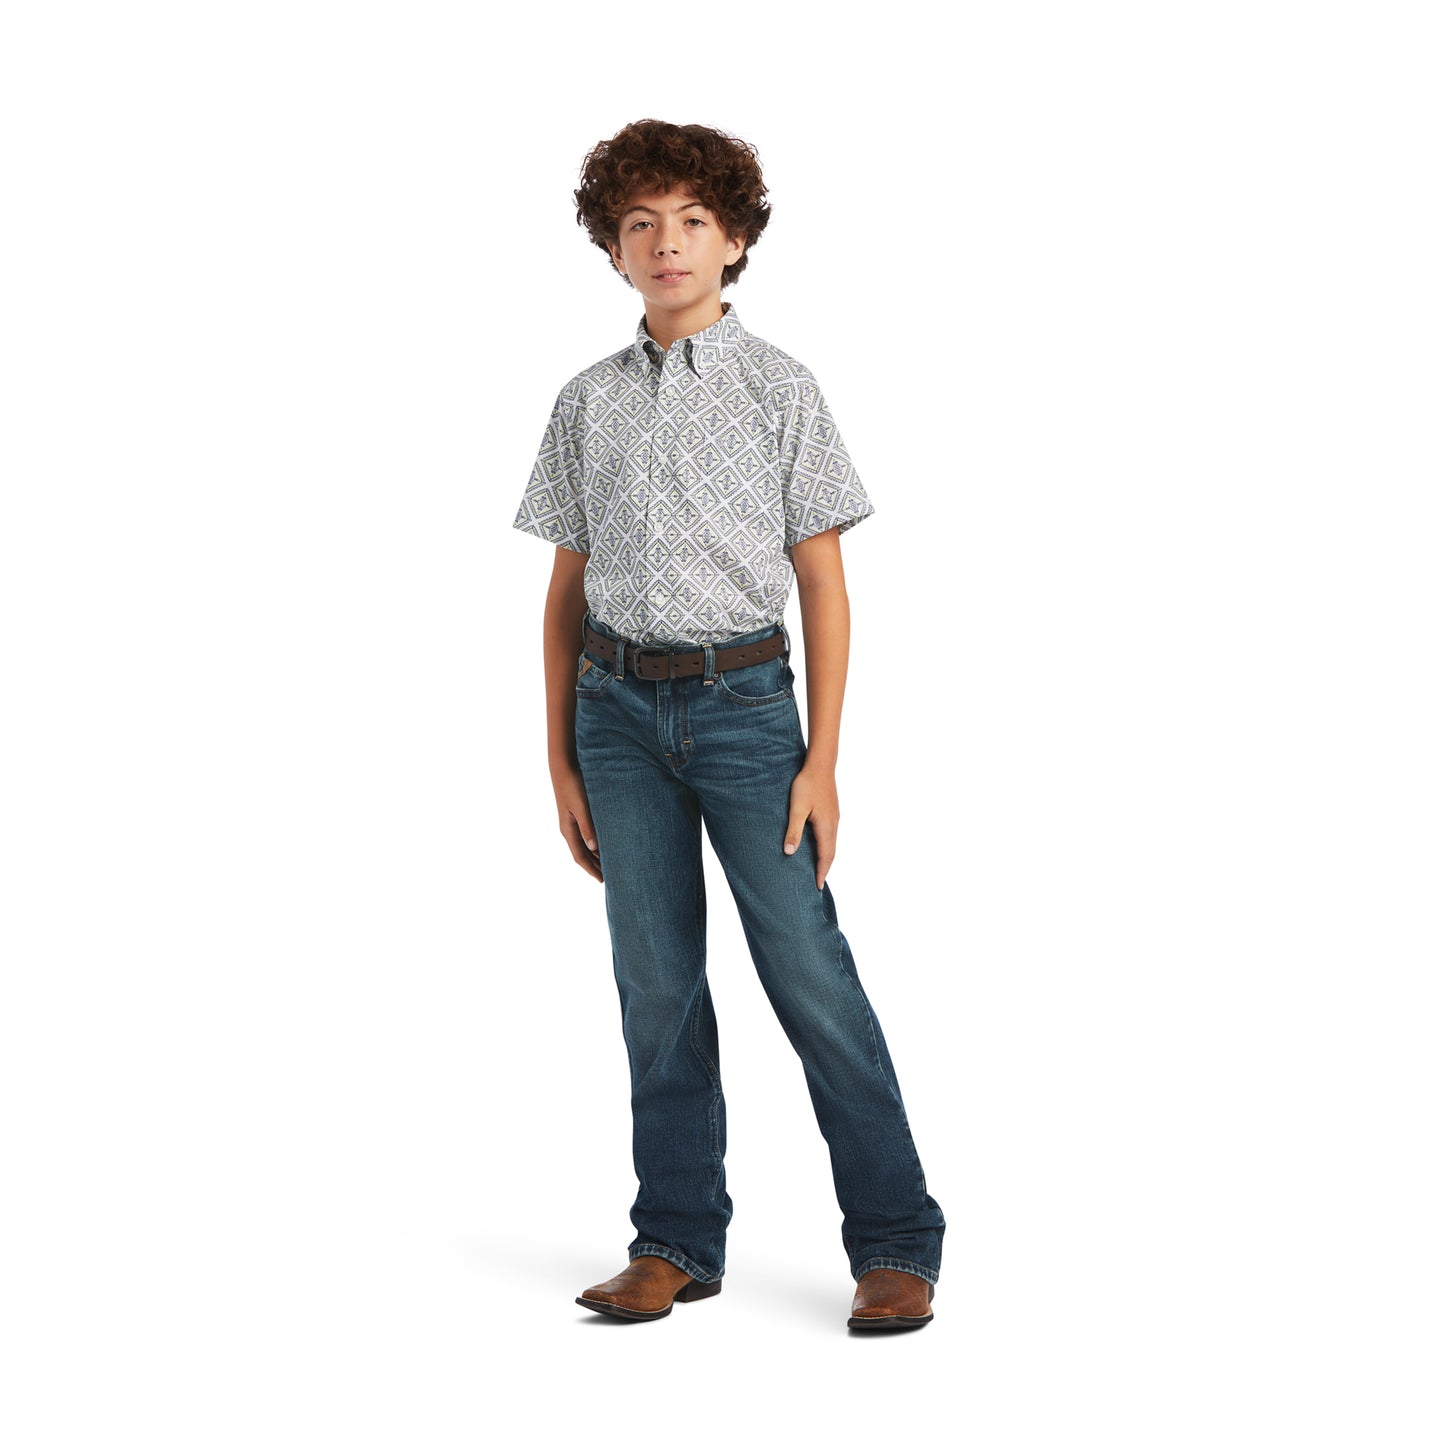 Ariat® Youth Boy's Baylor Classic White Button Down Shirt 10040733